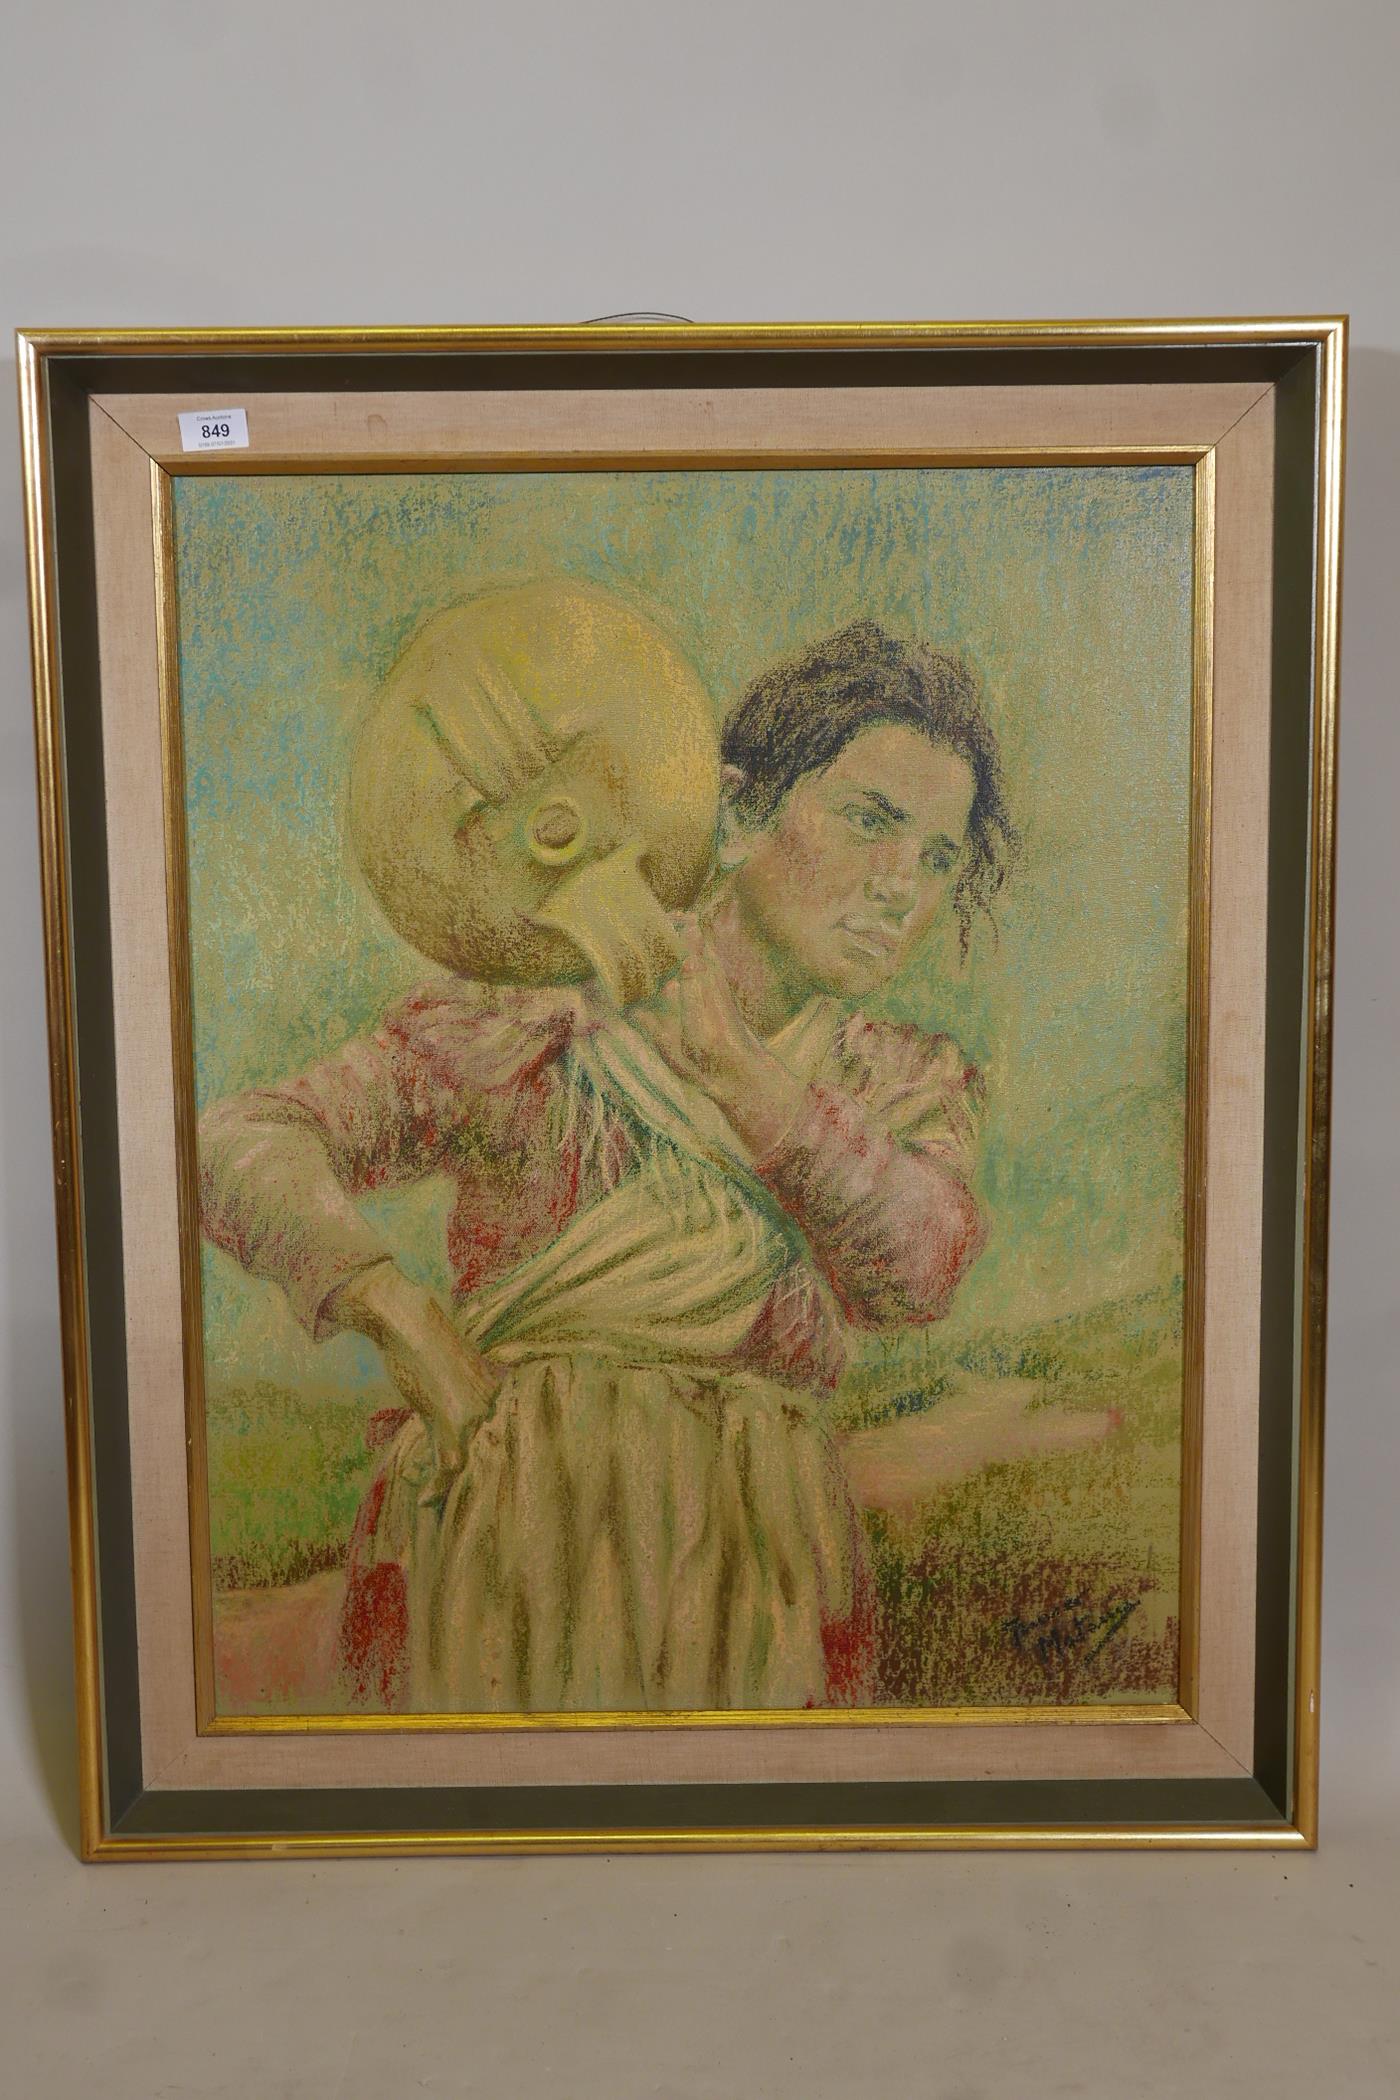 Study of a female carrying an amphora, oil on canvas board, signed indistinctly, 29" x 24" - Image 2 of 4